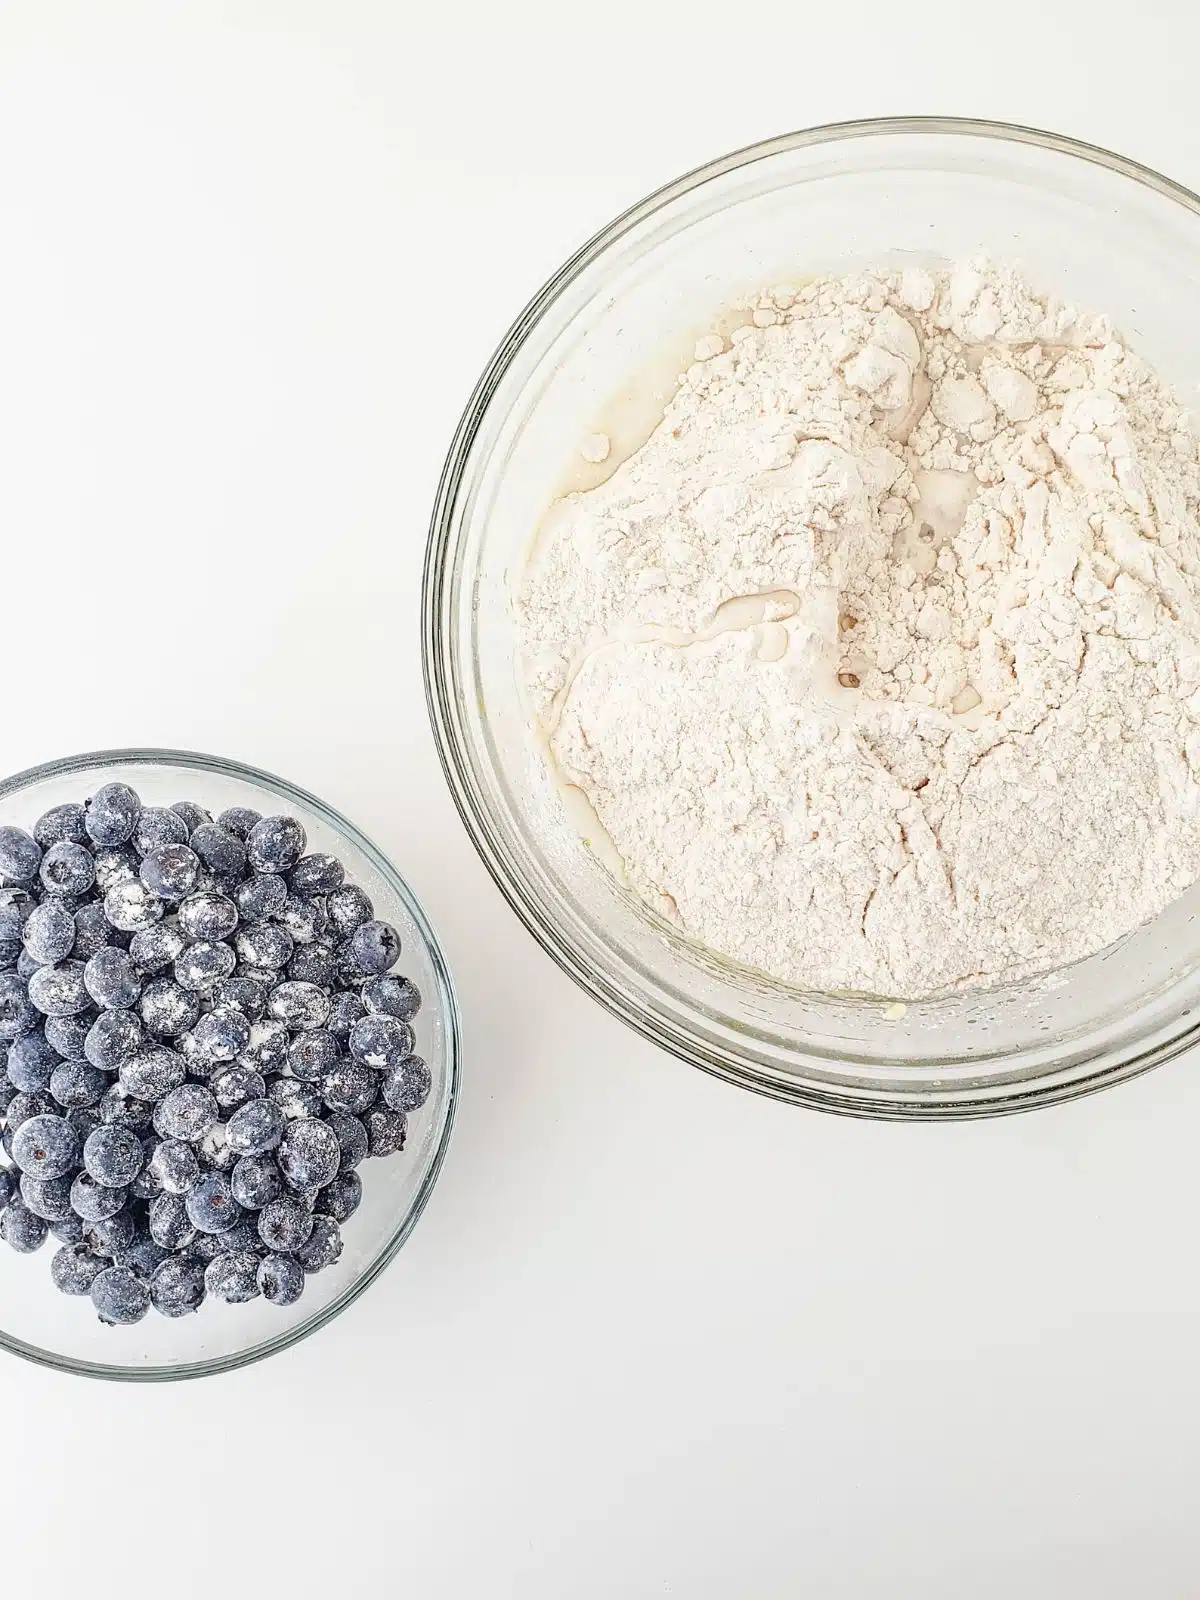 blueberries with flour for muffins.